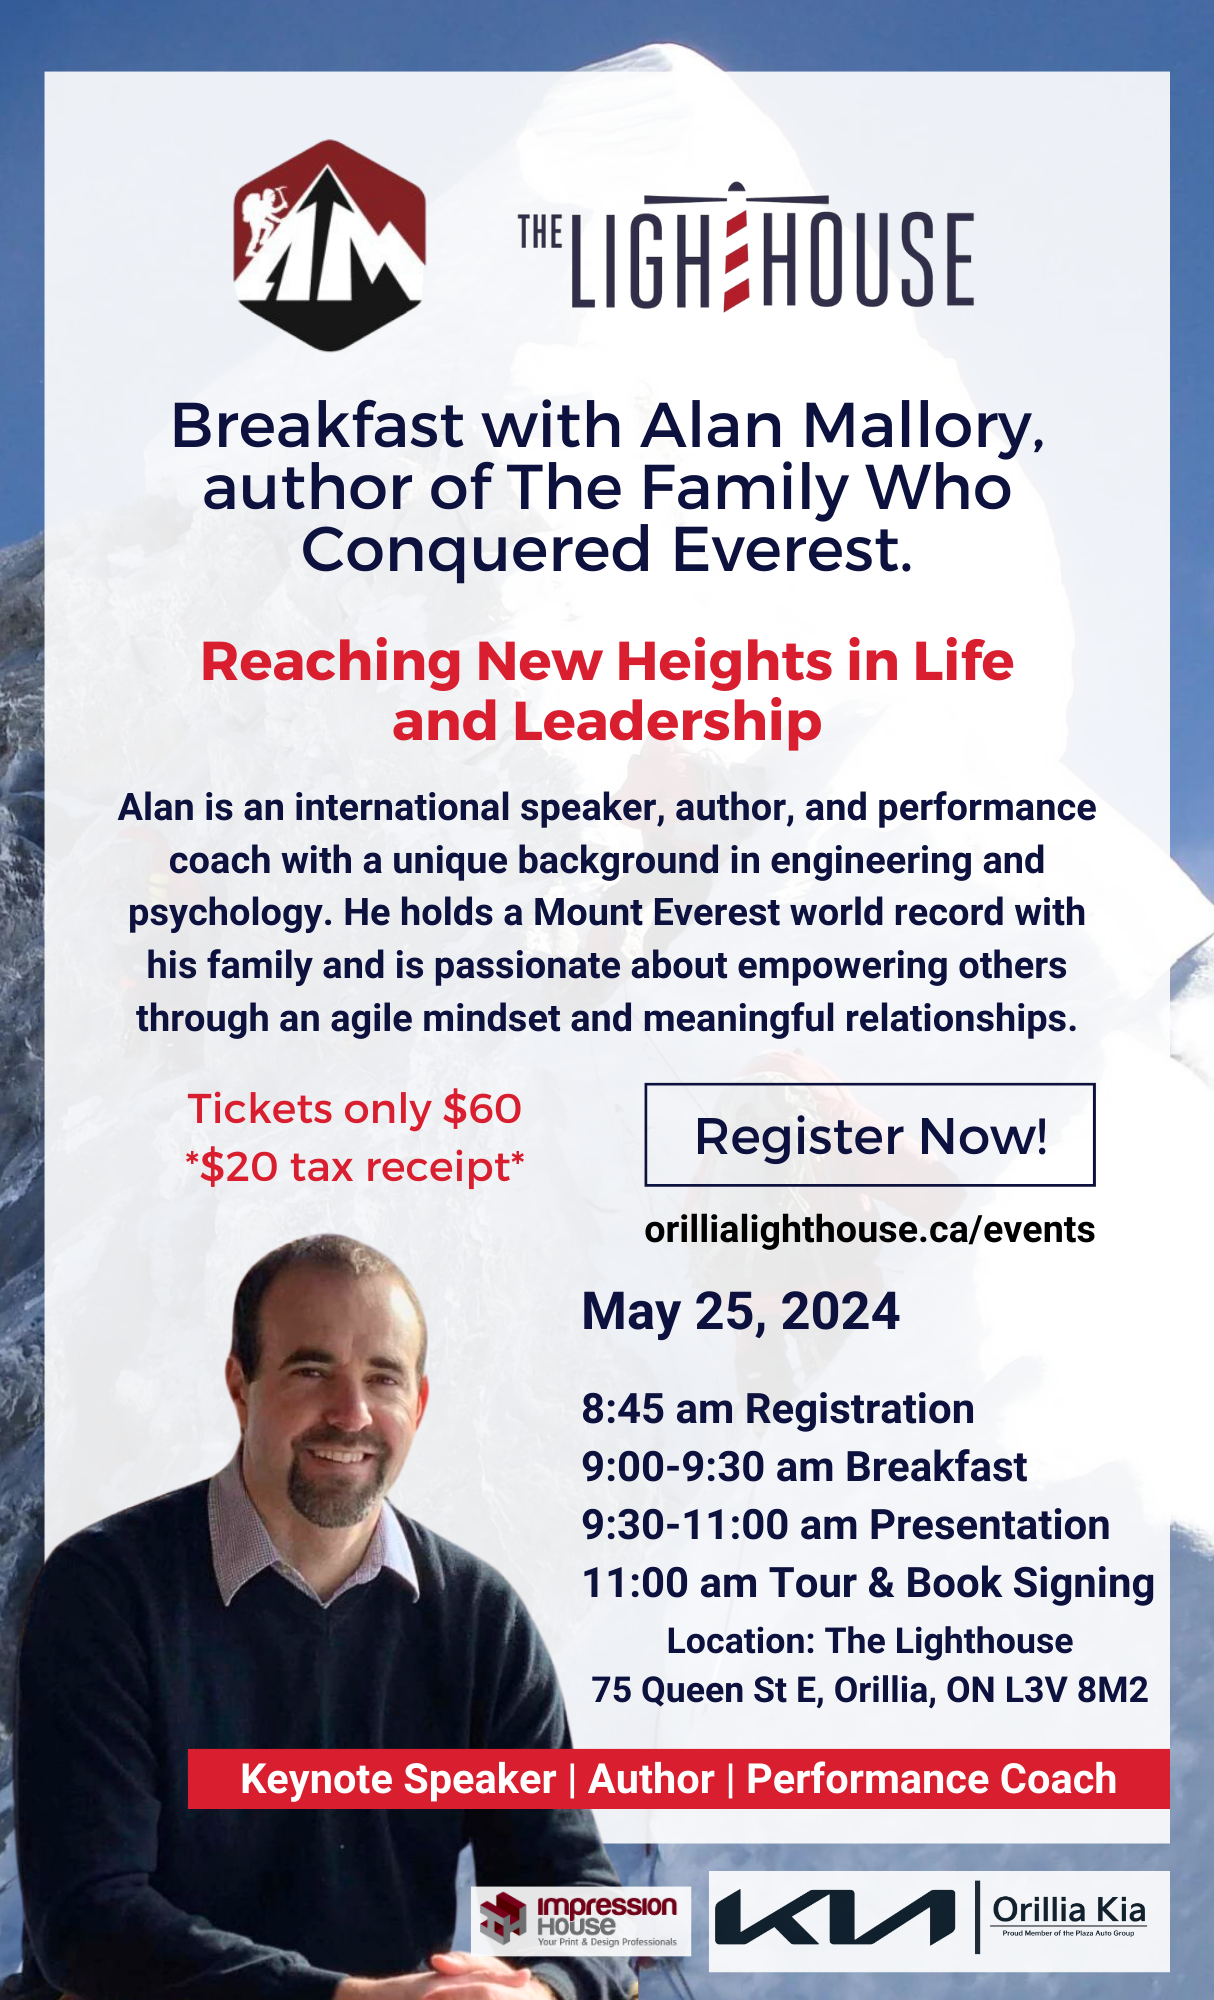 breakfast with Alan Mallory poster information for The Lighthouse Event